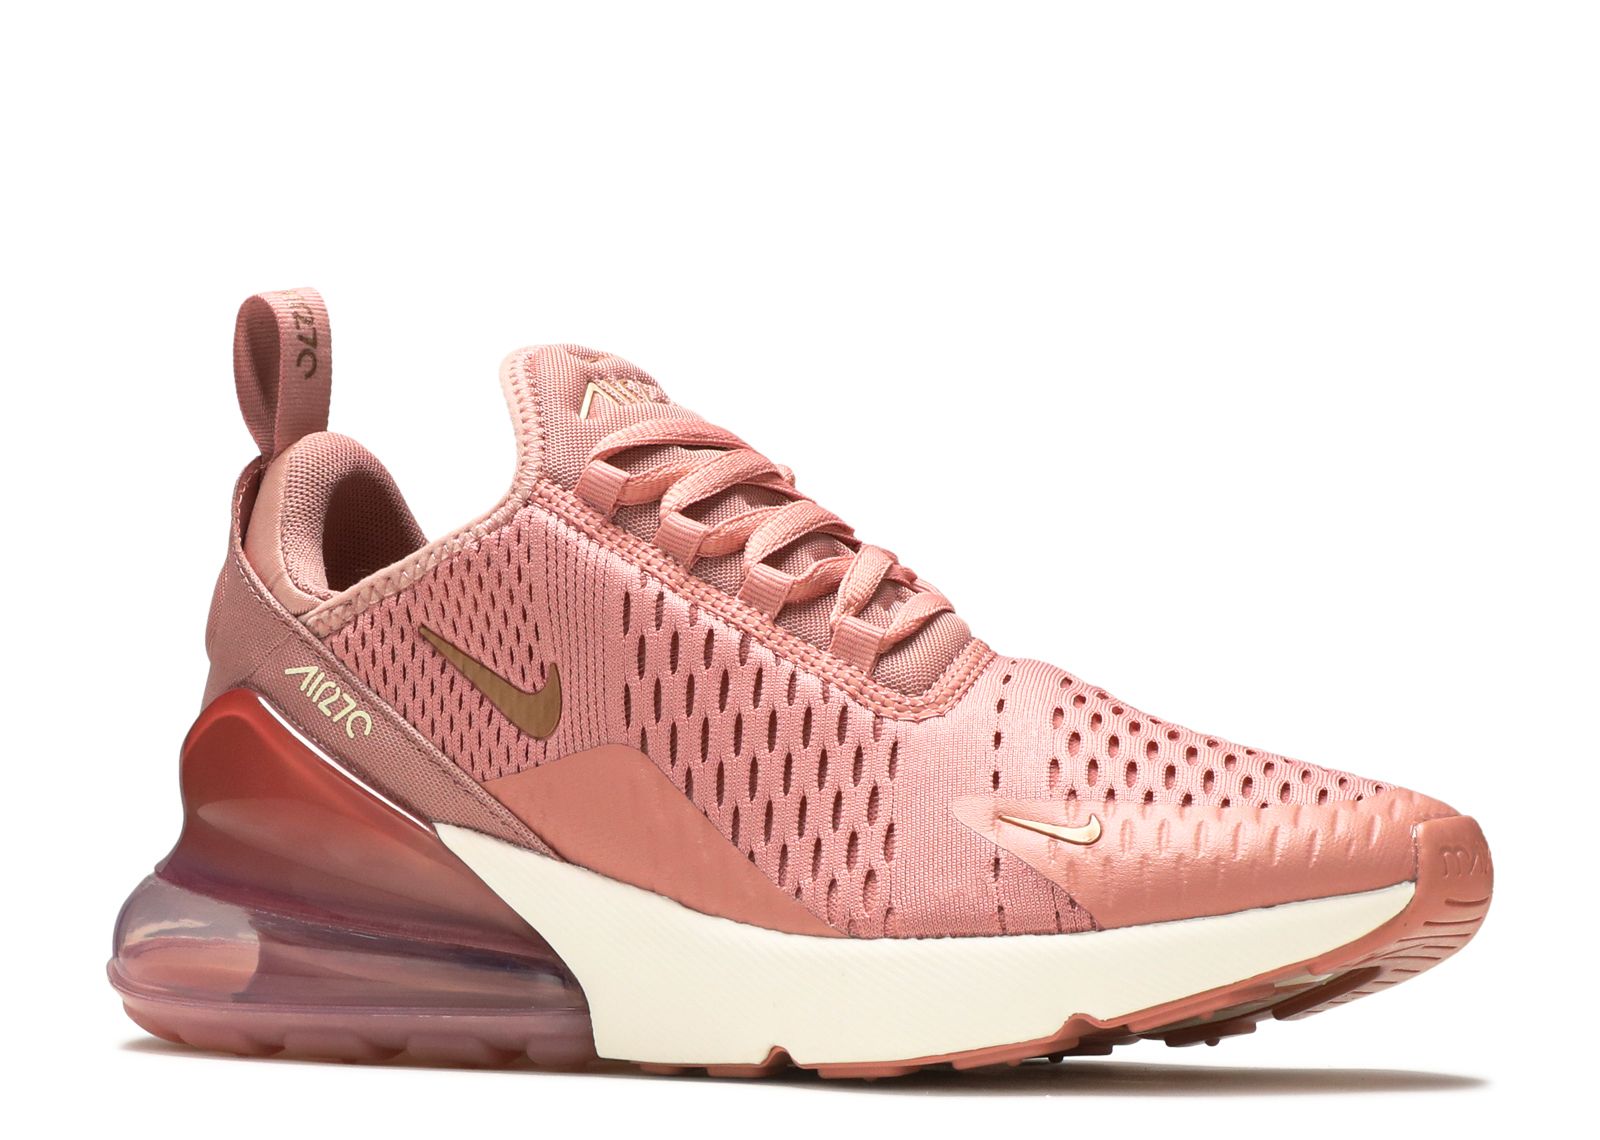 Wmns Air Max 270 'Rust Pink' - Nike 